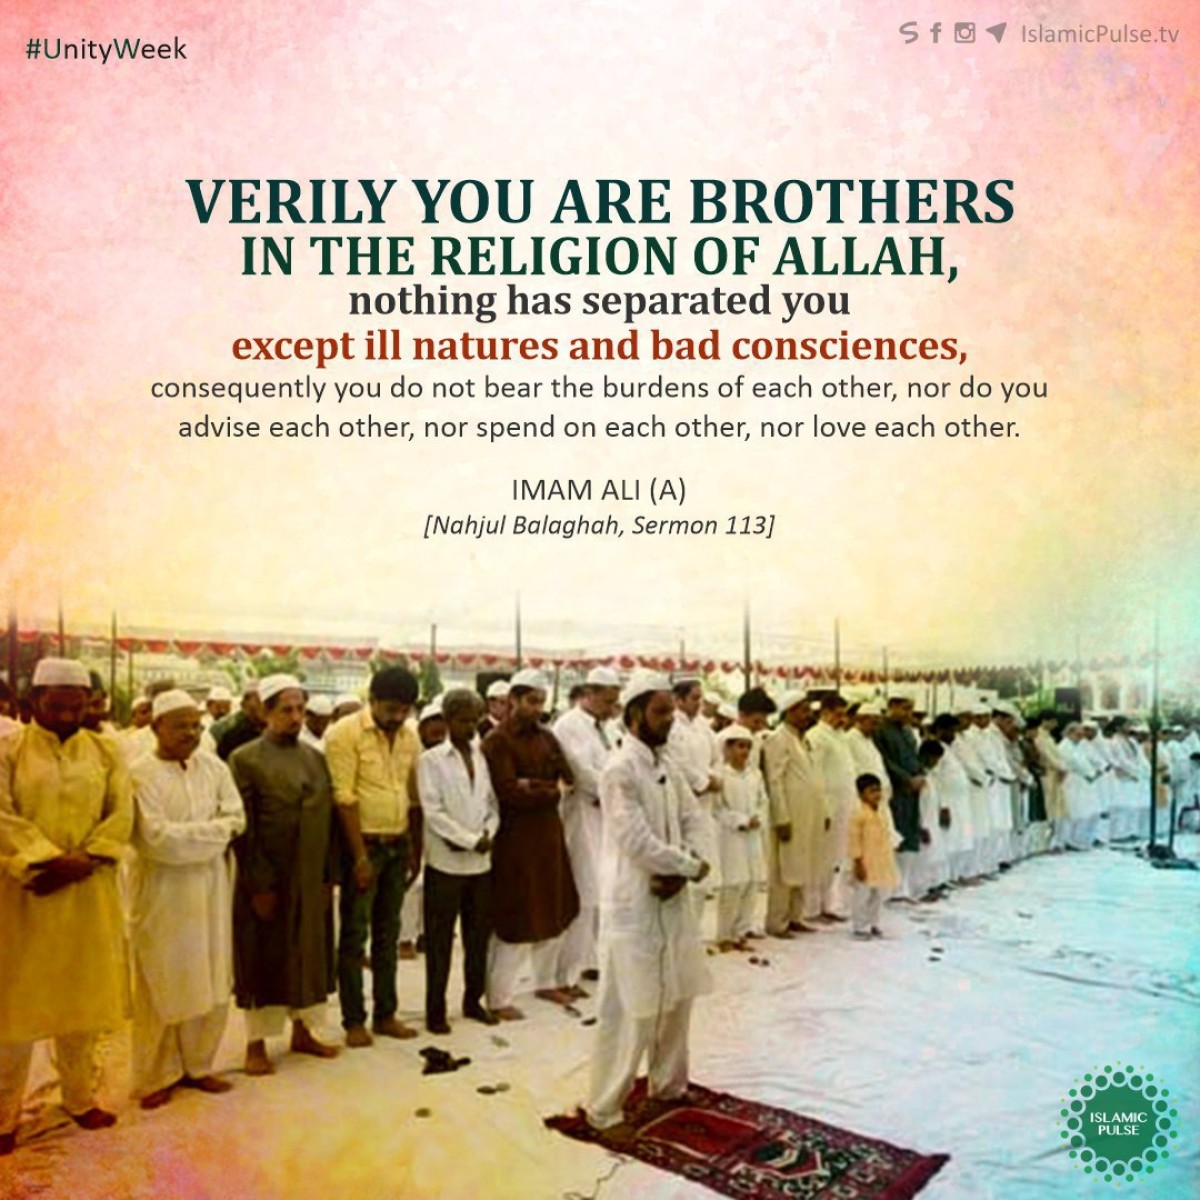 Verily you are brothers in the religion of Allah